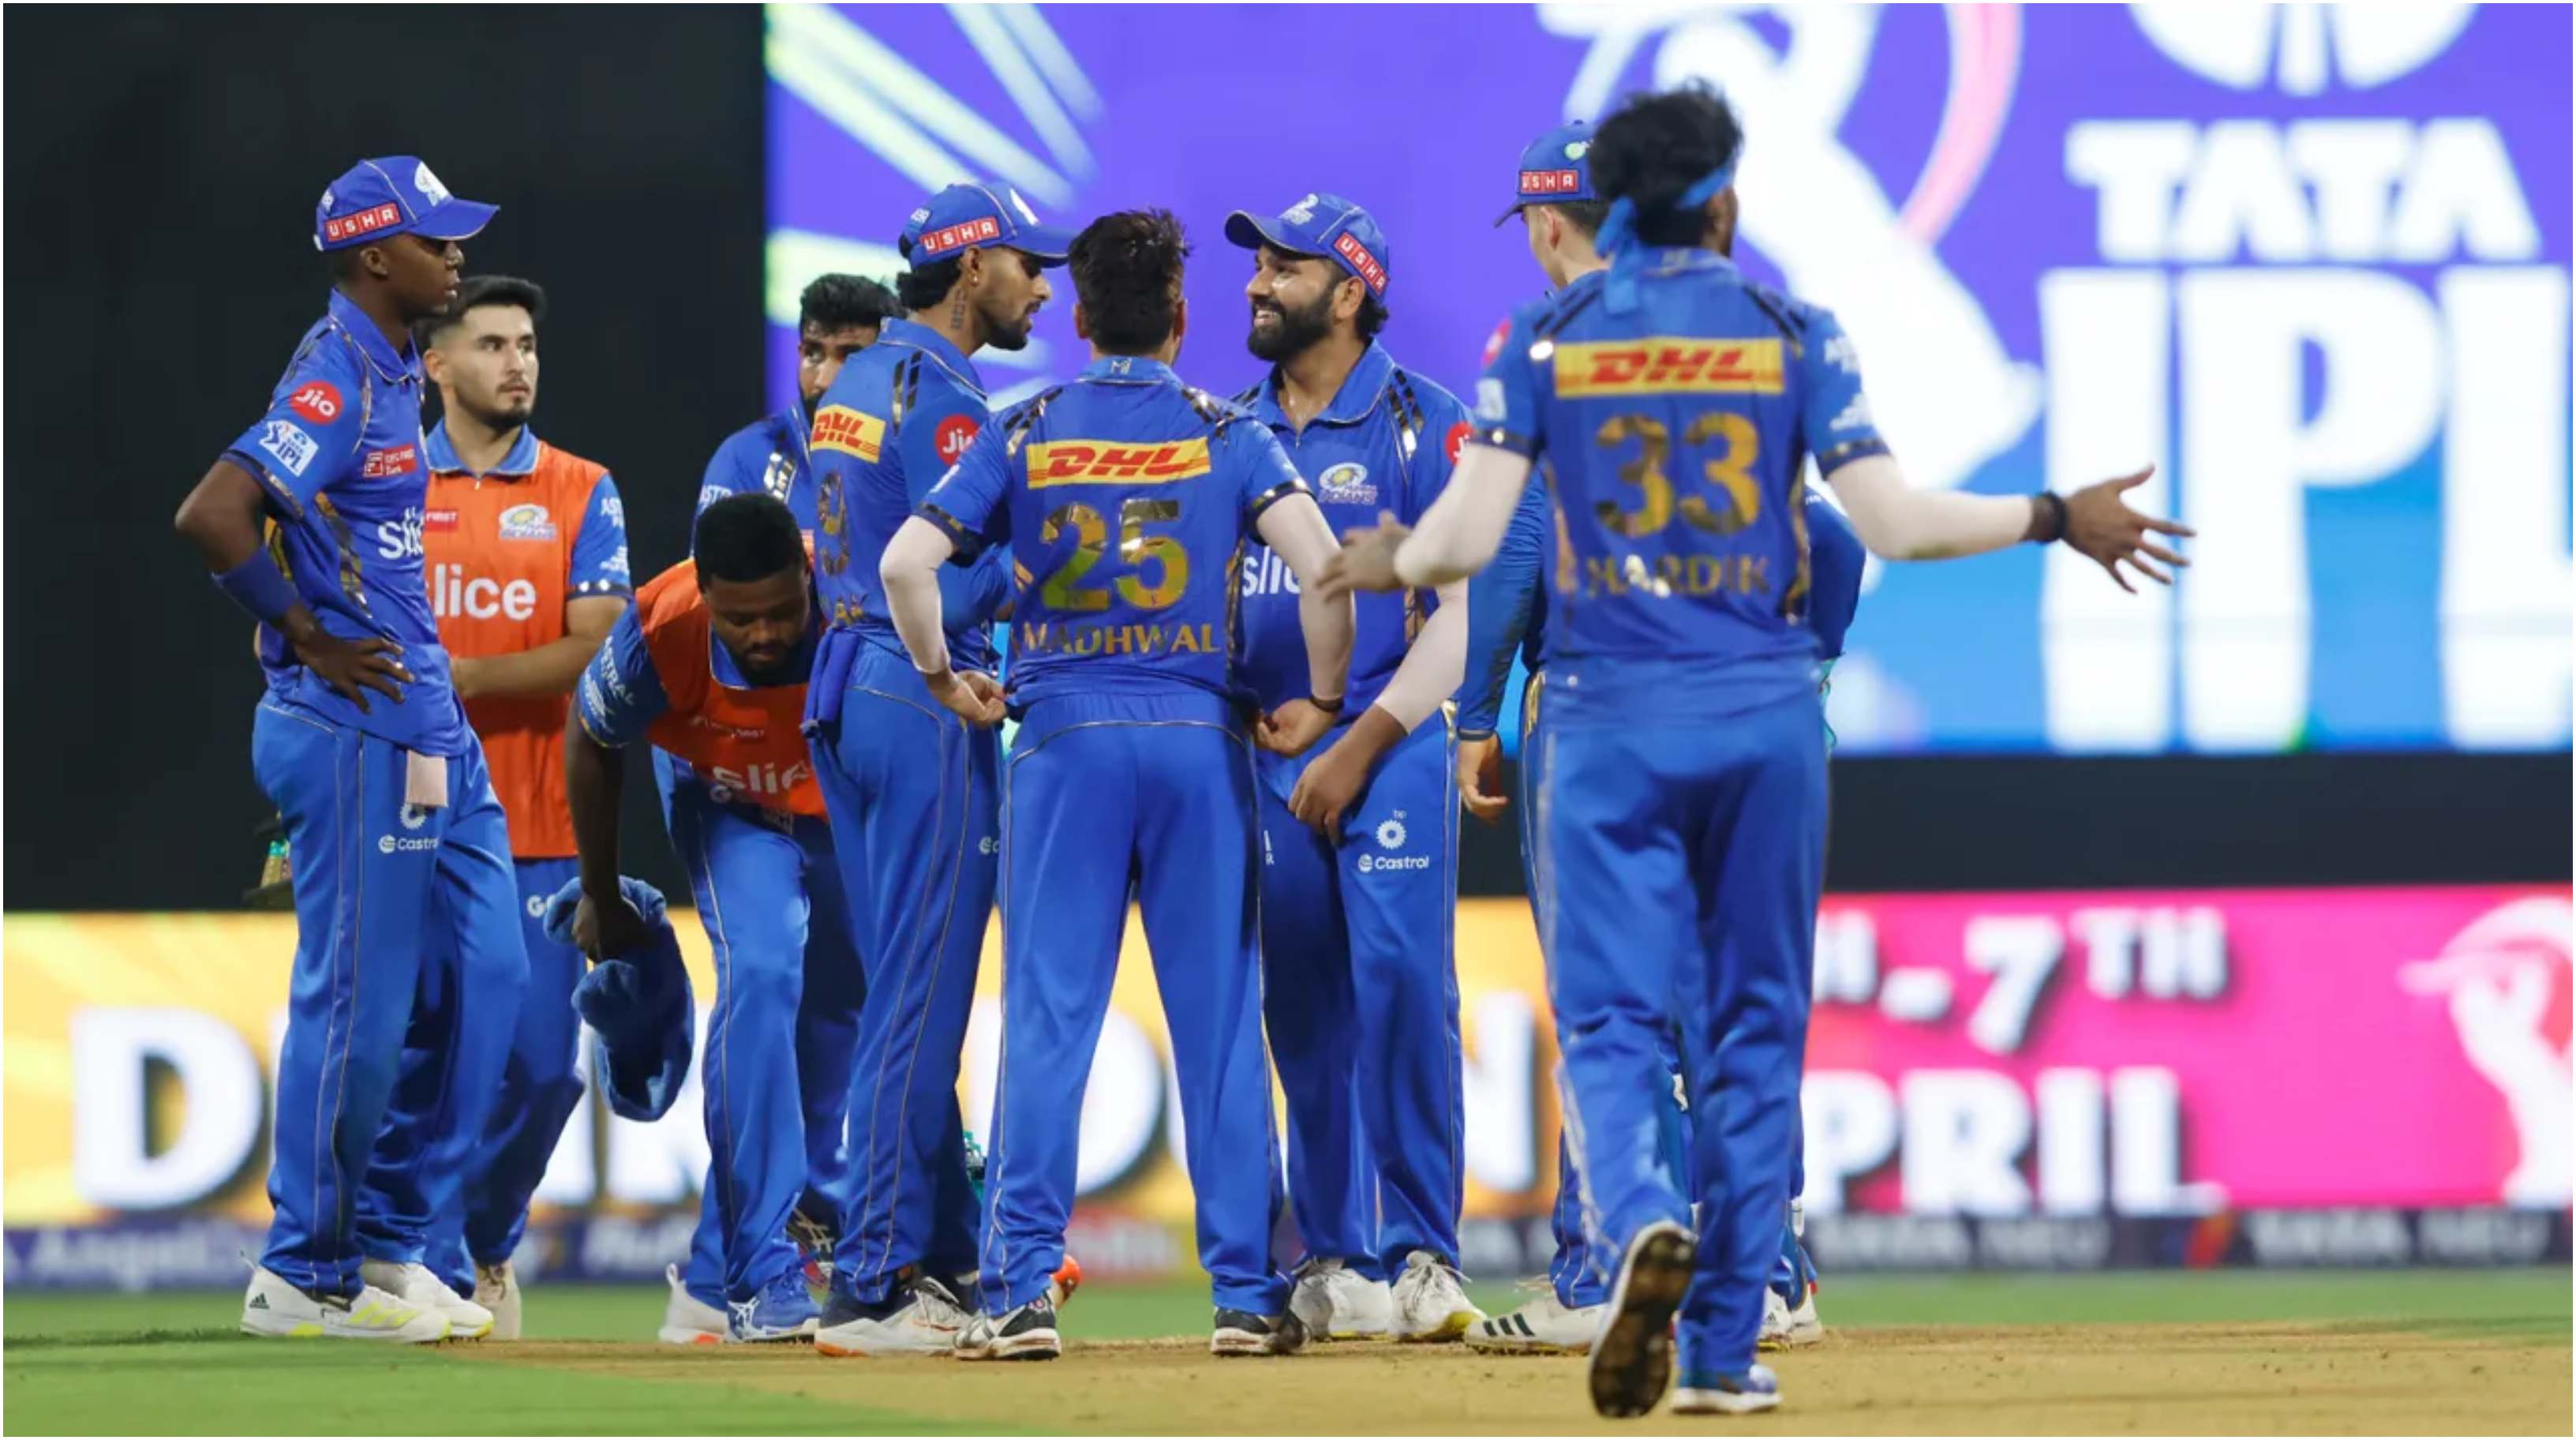 Mumbai Indians were outplayed by Rajasthan Royals | IPL-BCCI